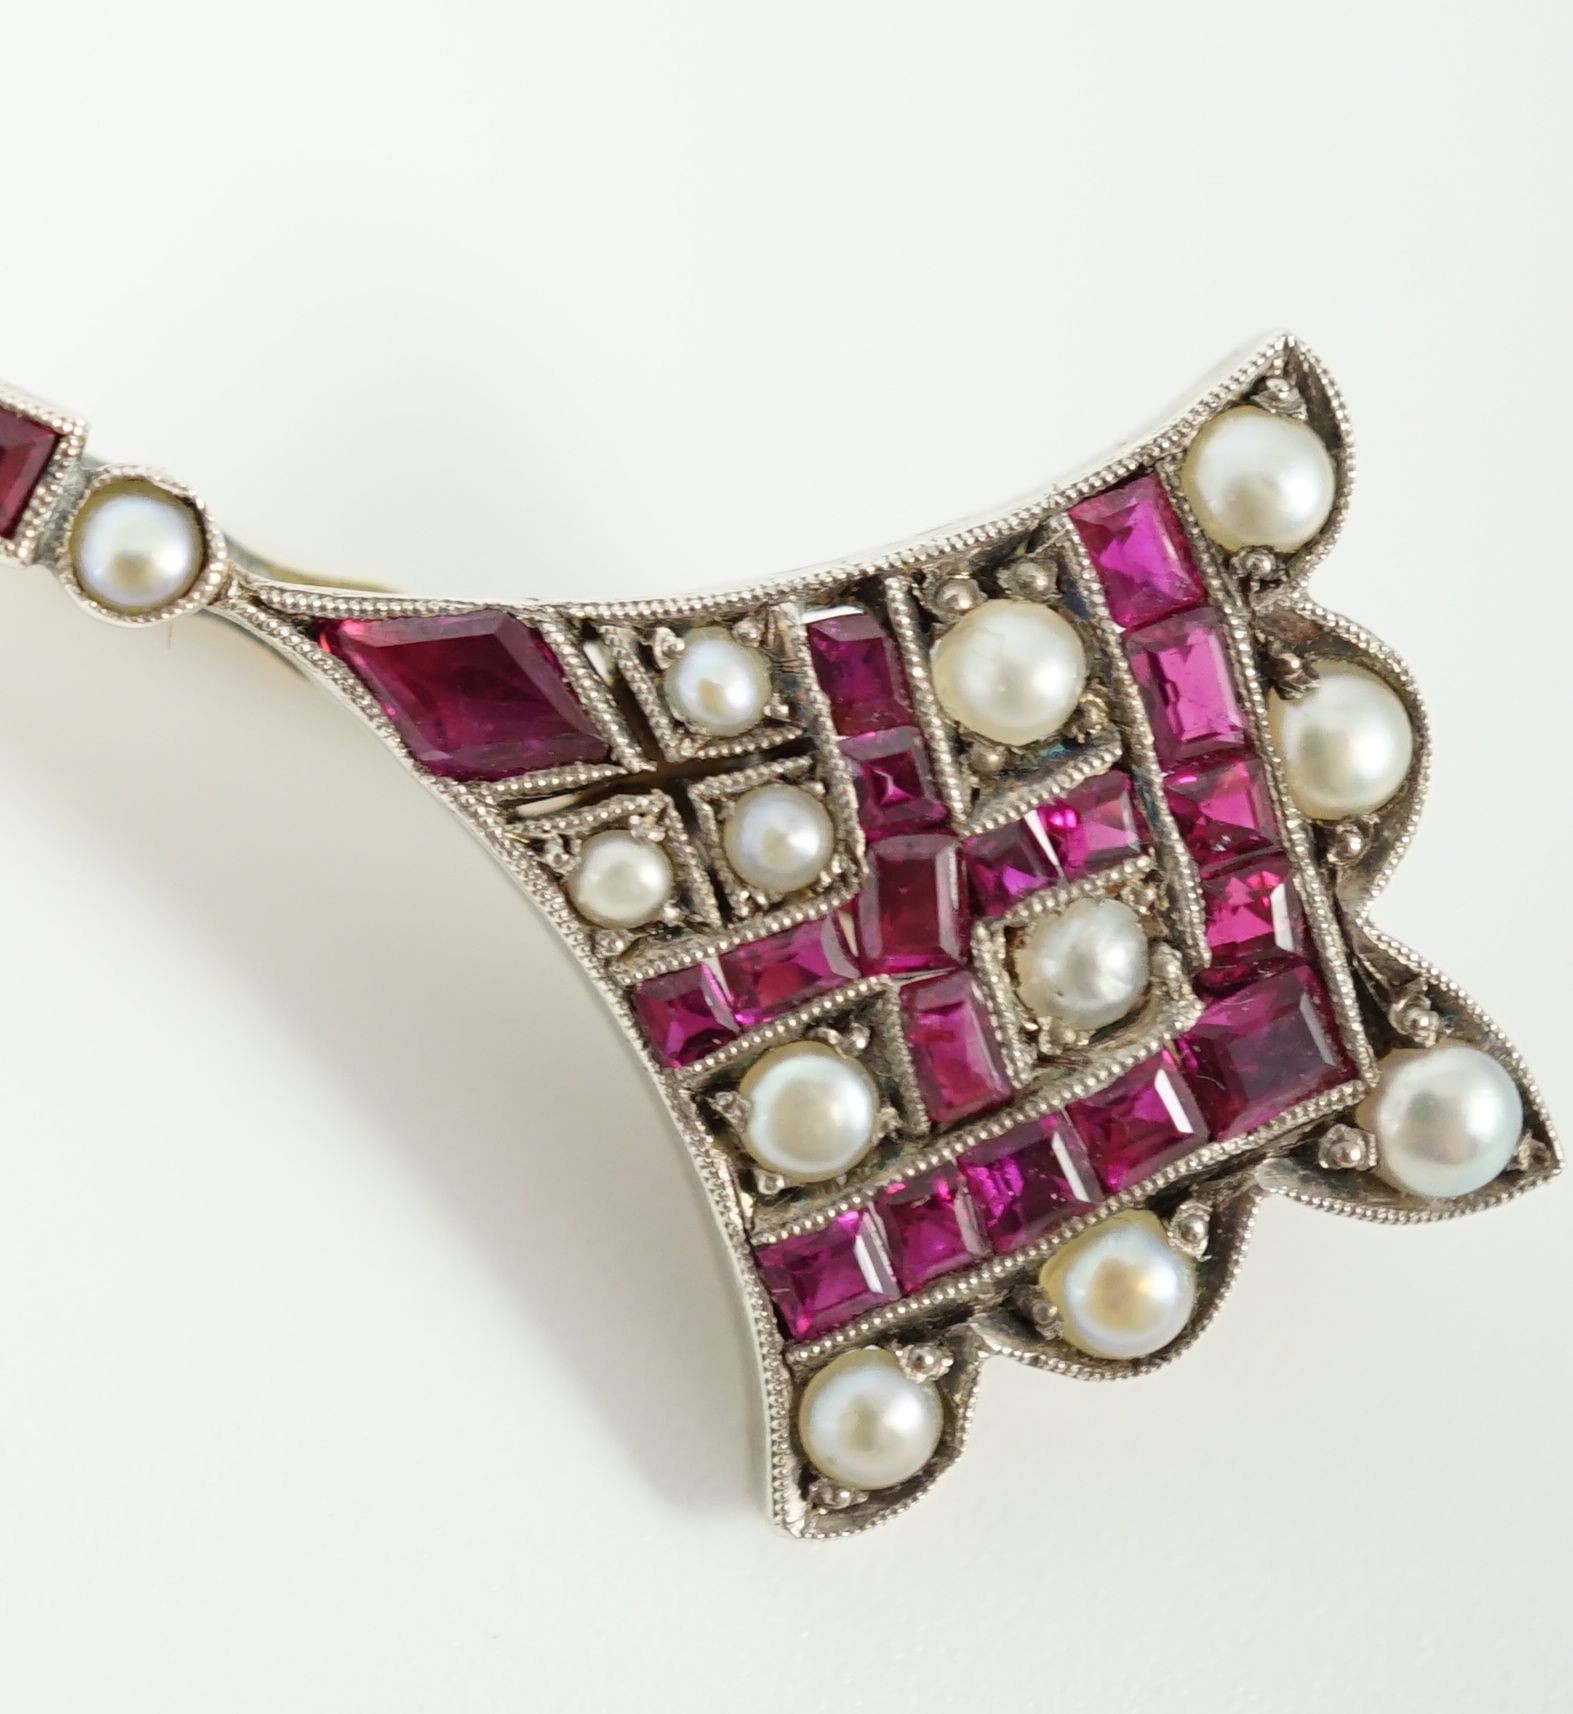 An early 20th century, gold, platinum, ruby and seed pearl set brooch